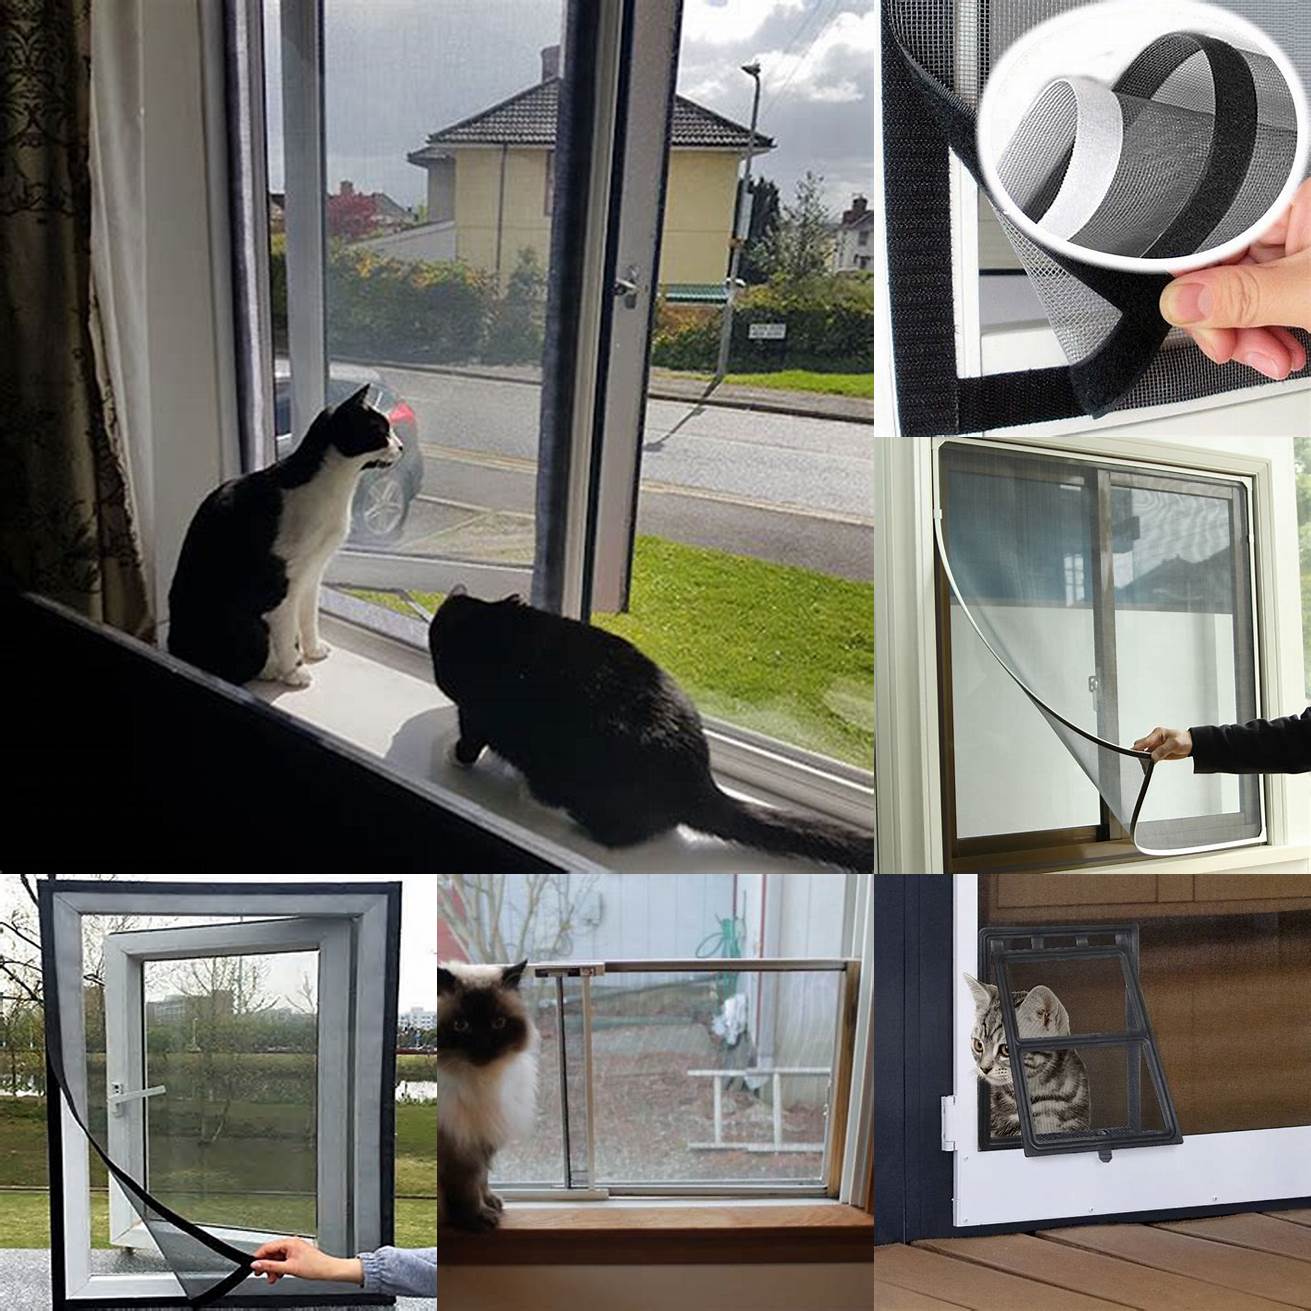 Install screens - If you want to keep your windows open consider installing screens